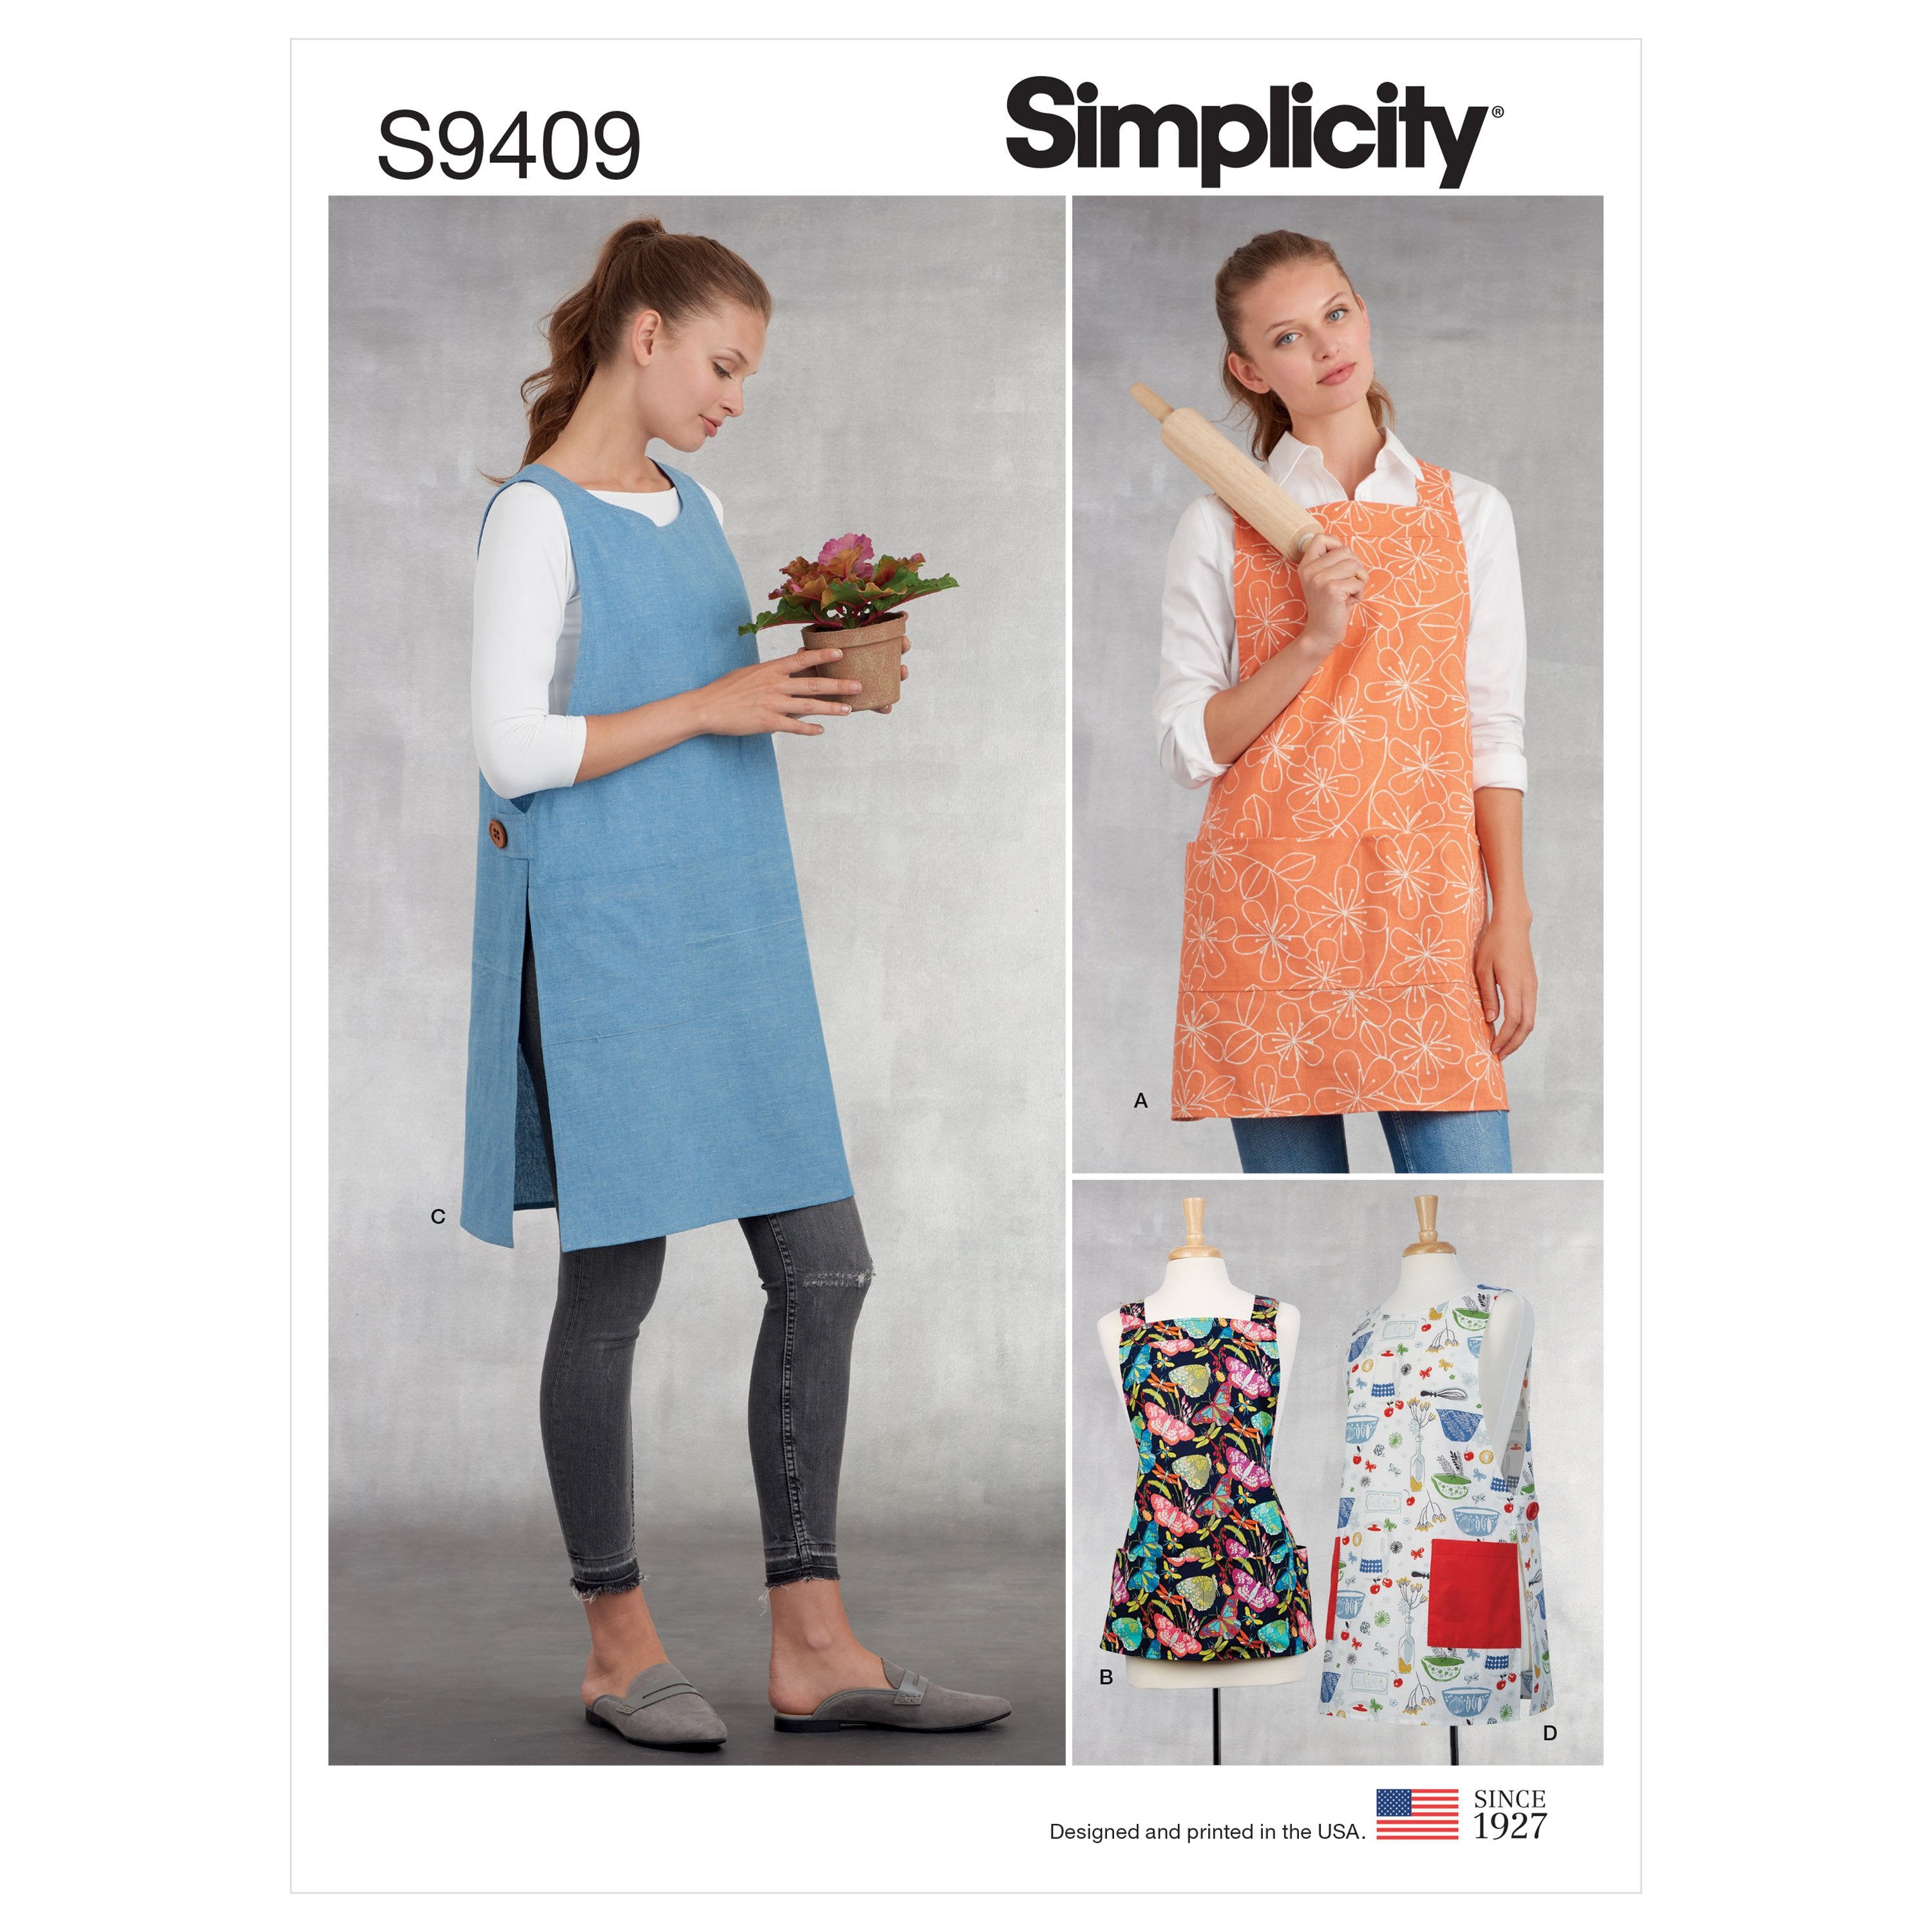 Simplicity Sewing Pattern 9409 Misses' Aprons from Jaycotts Sewing Supplies